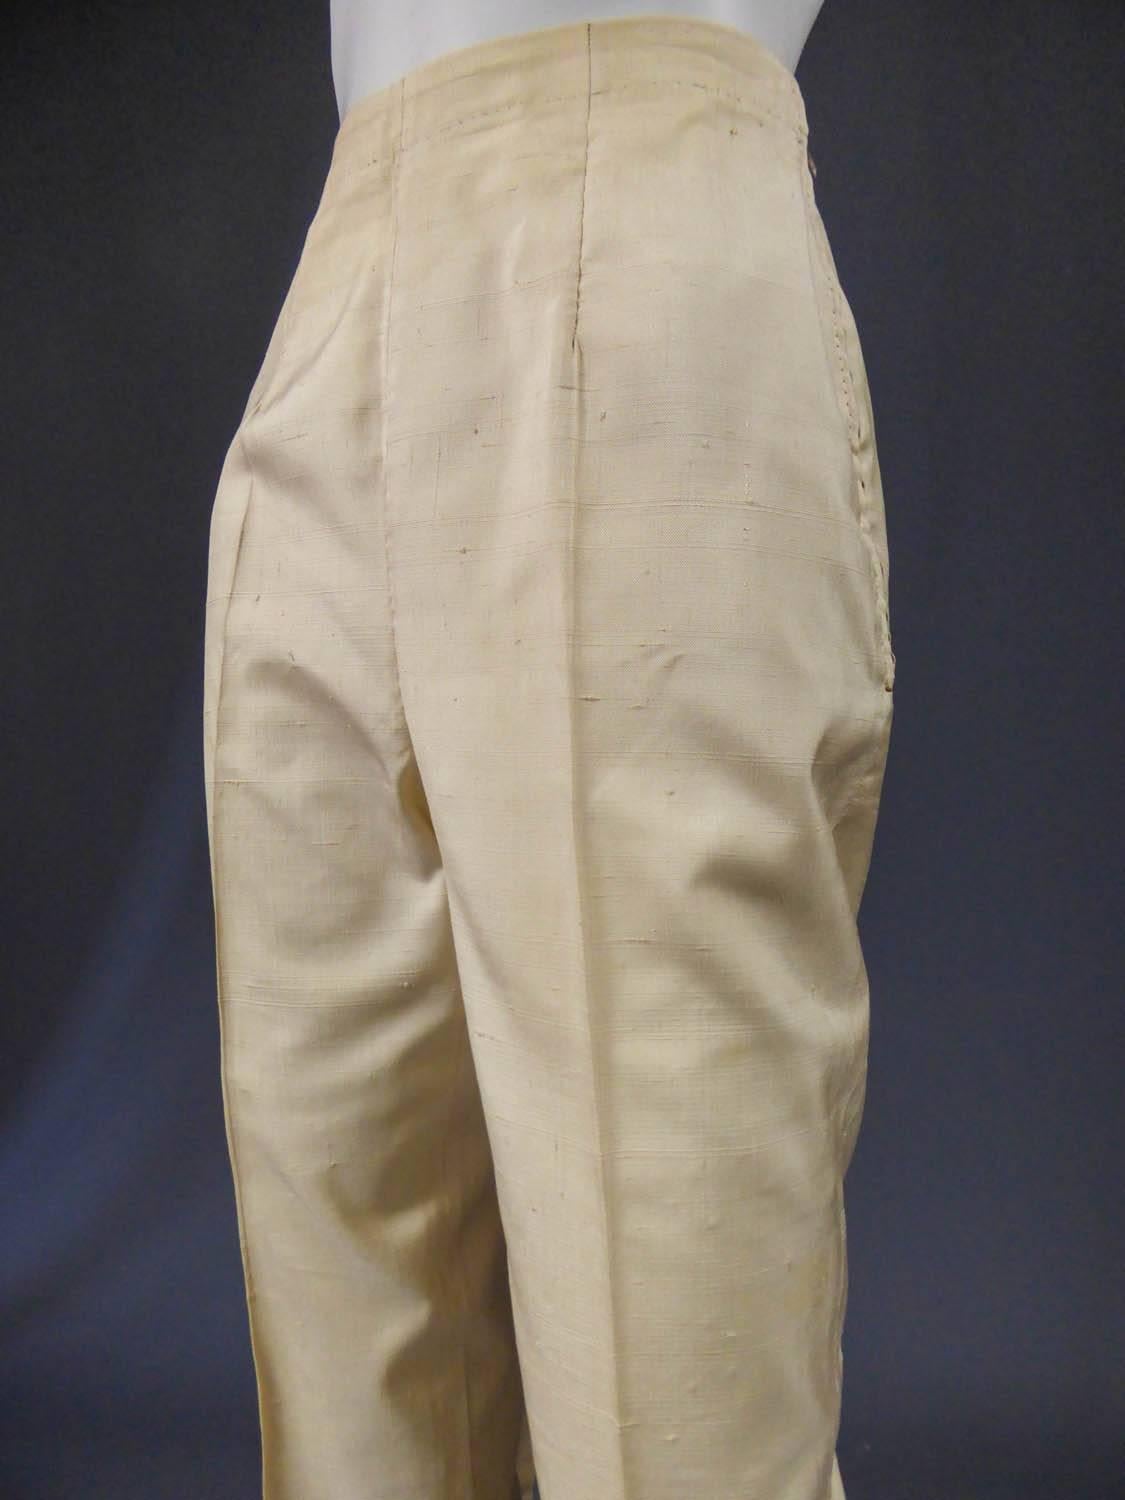 Circa 1960

Italy

High-waisted straight cut pants in ivory wild silk shantung. Without belt, with a work of pleats from the waist. Side metal zipper on the hips. Small button tab at the closure. Darts widened origins and hand finish. Label white